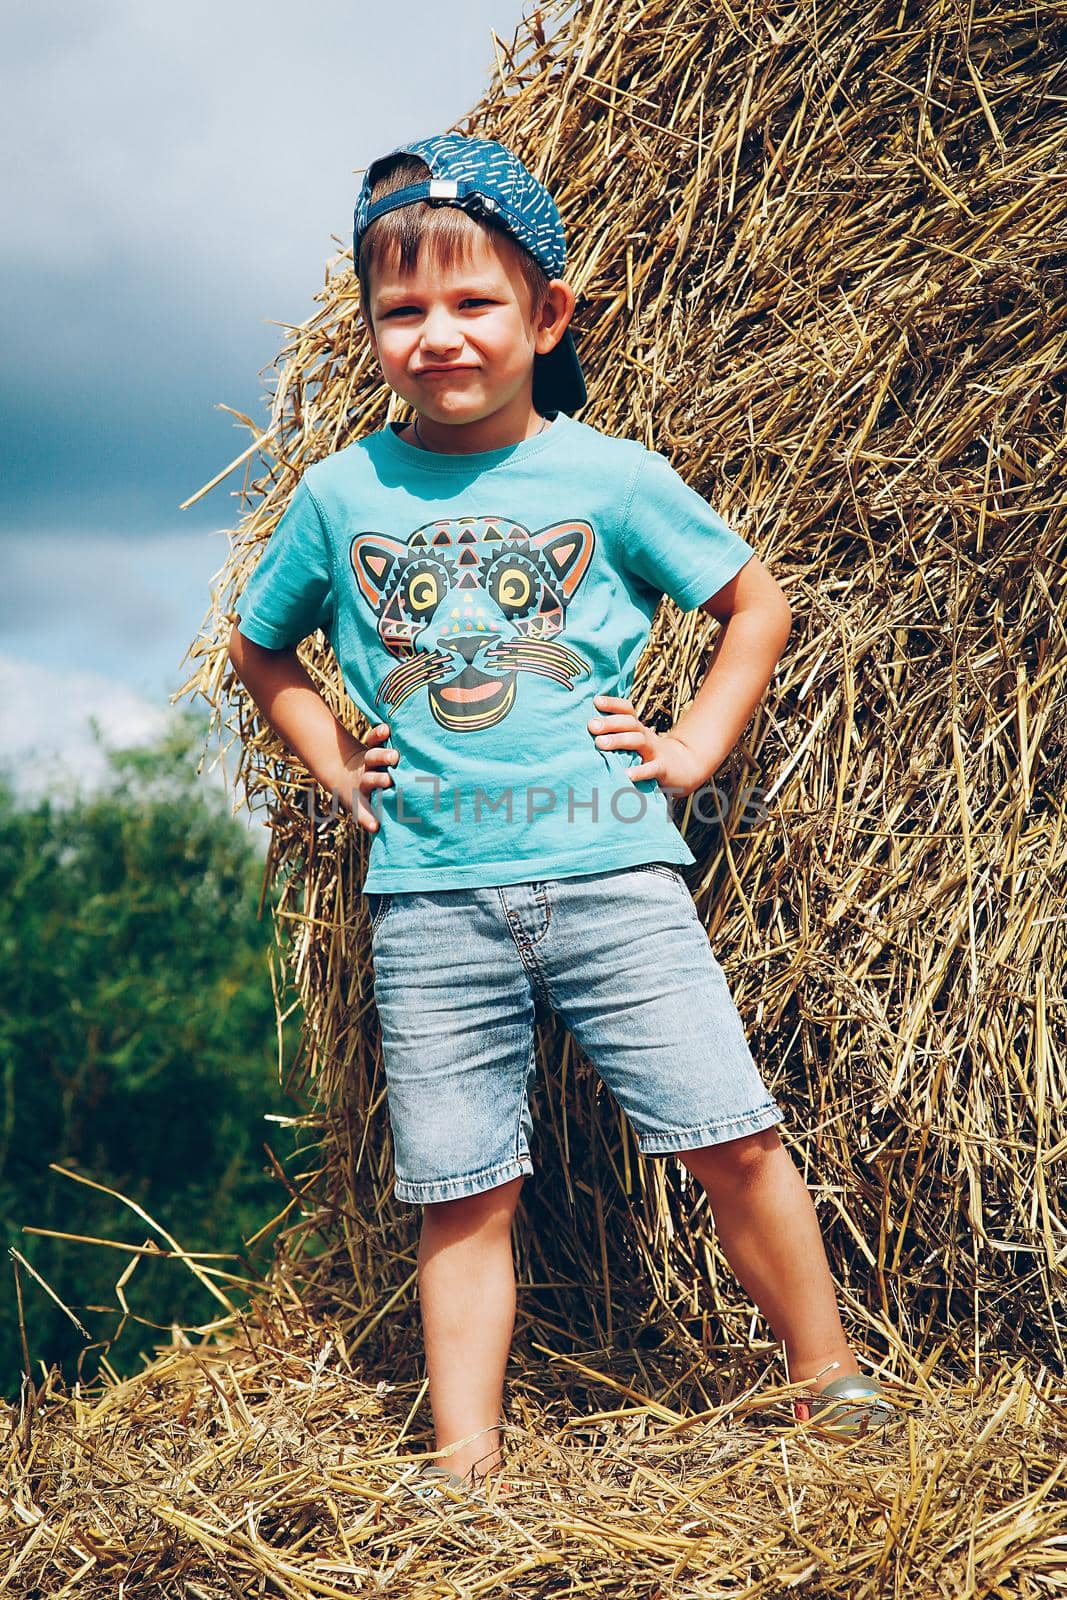 A little boy in a blue baseball cap and short denim shorts plays on straw bales on a hot summer day